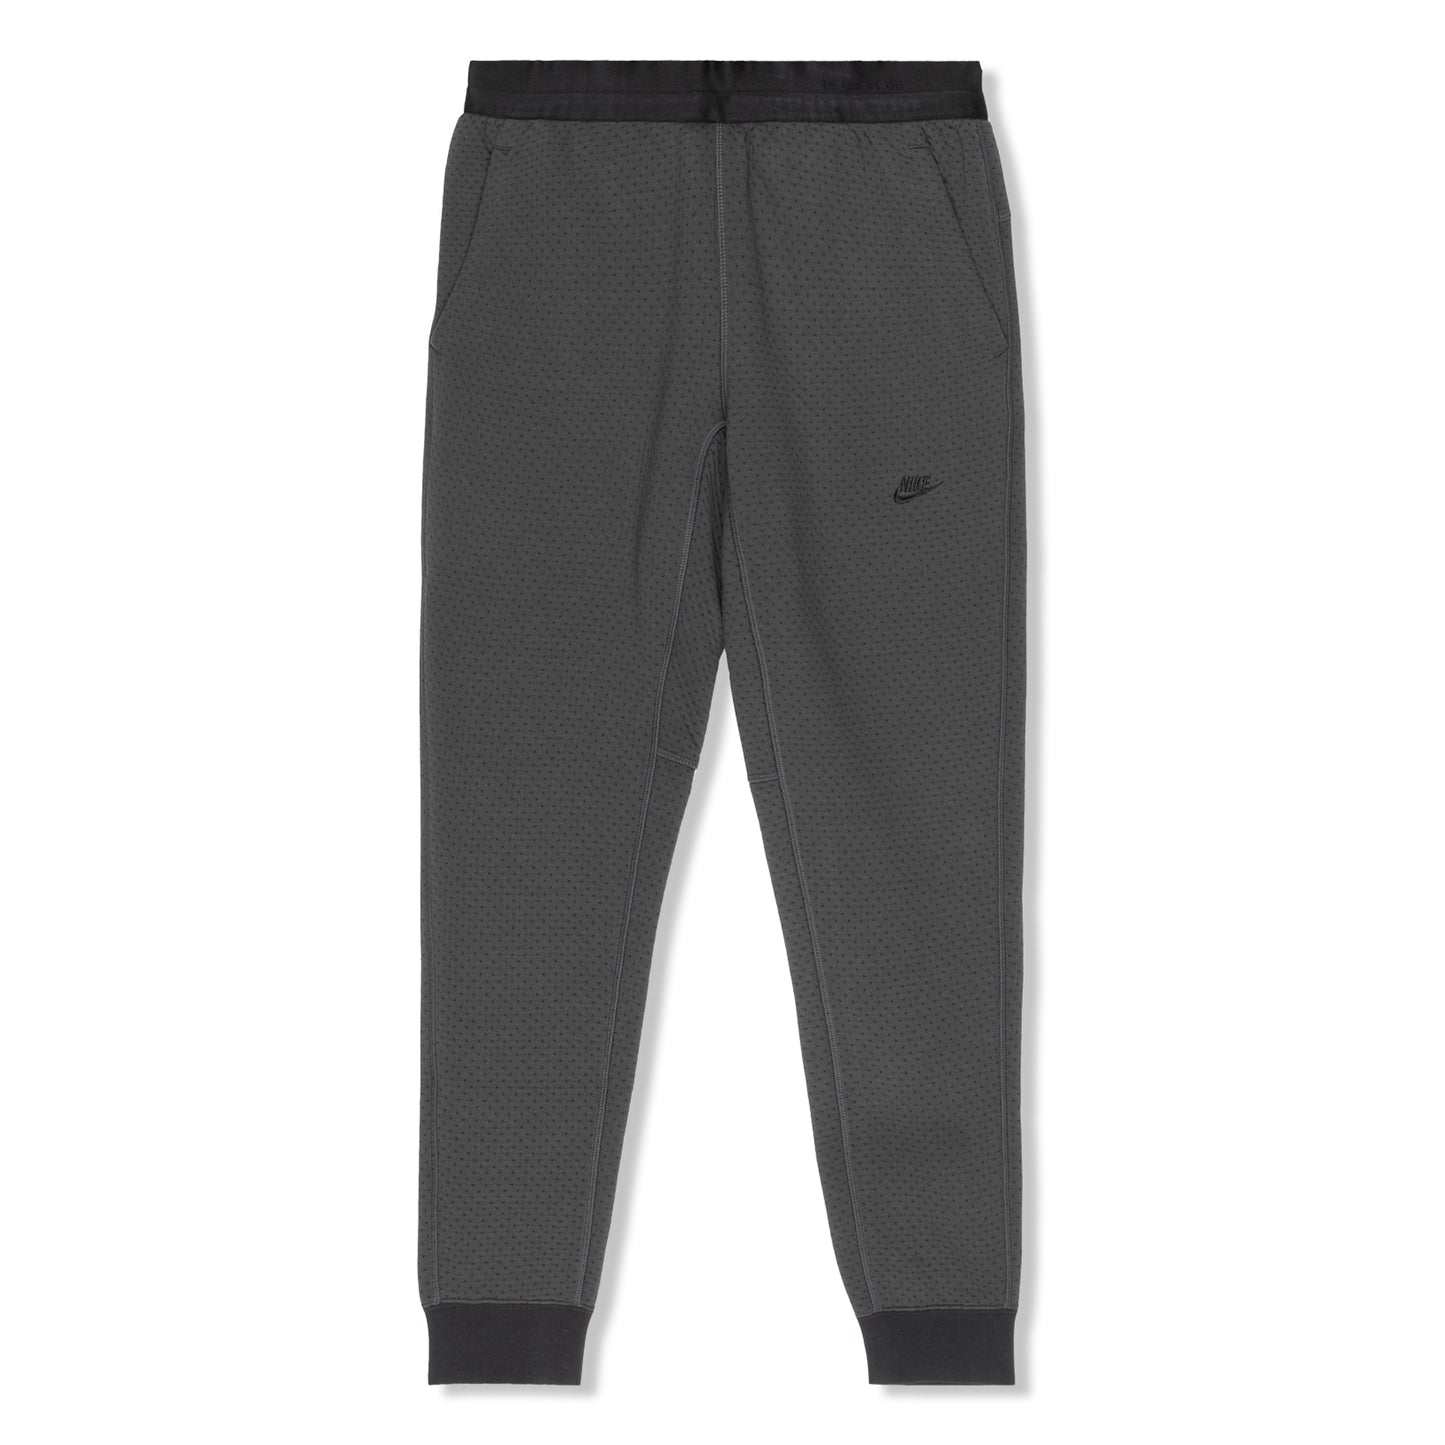 Nike Sportswear Therma-FIT ADV Tech Pack Engineered Pants (Anthracite/Black)